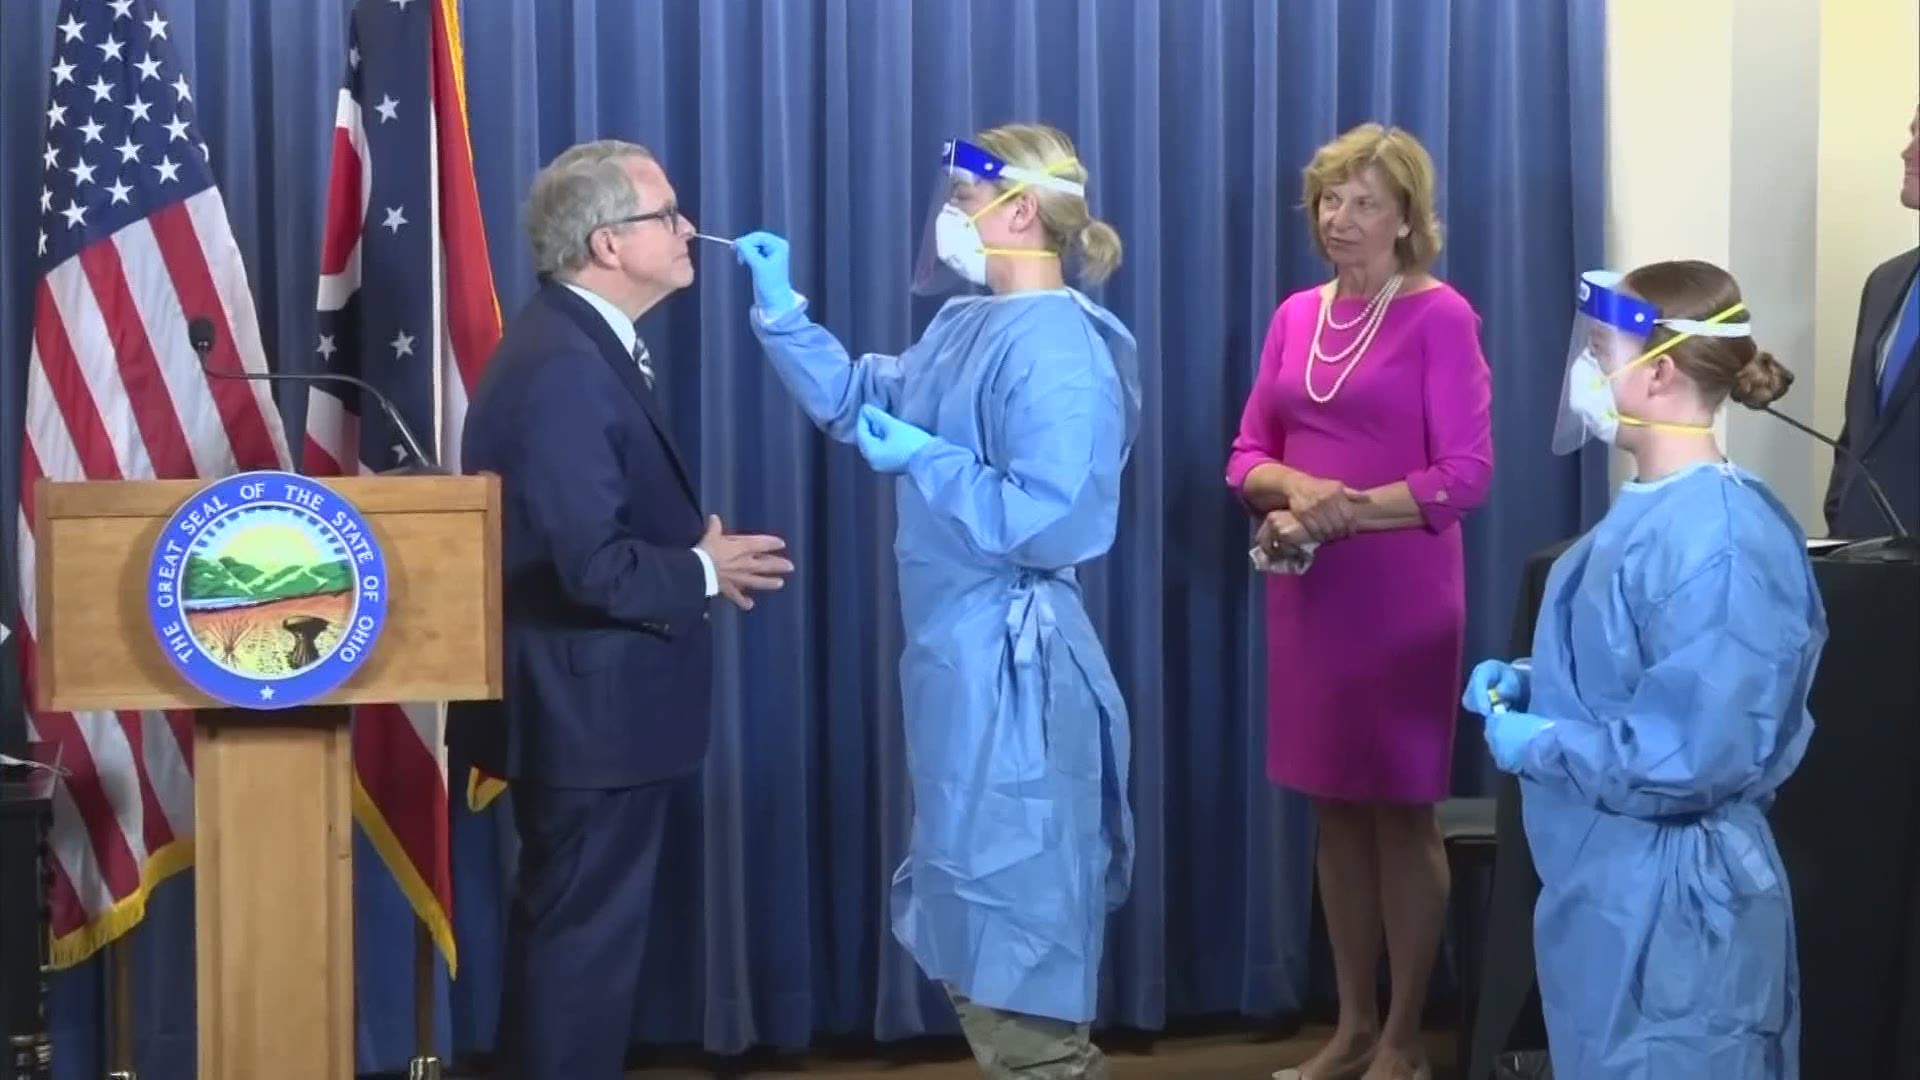 Gov. Mike DeWine, along with his wife Fran and Lt. Gov Jon Husted, got tested for the virus during the live briefing Tuesday.